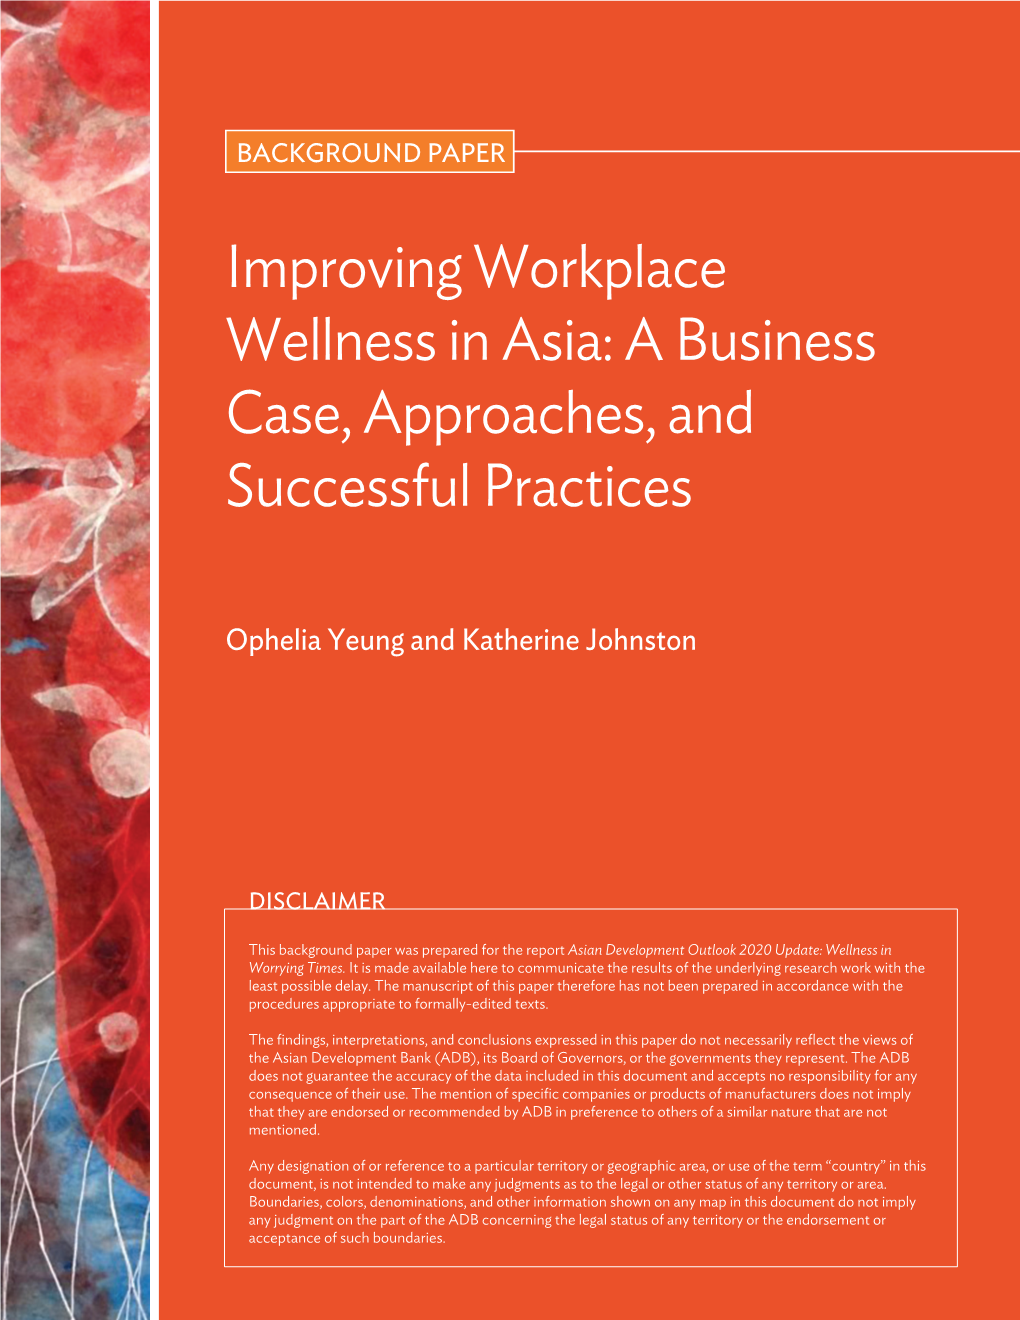 Improving Workplace Wellness in Asia: a Business Case, Approaches, and Successful Practices